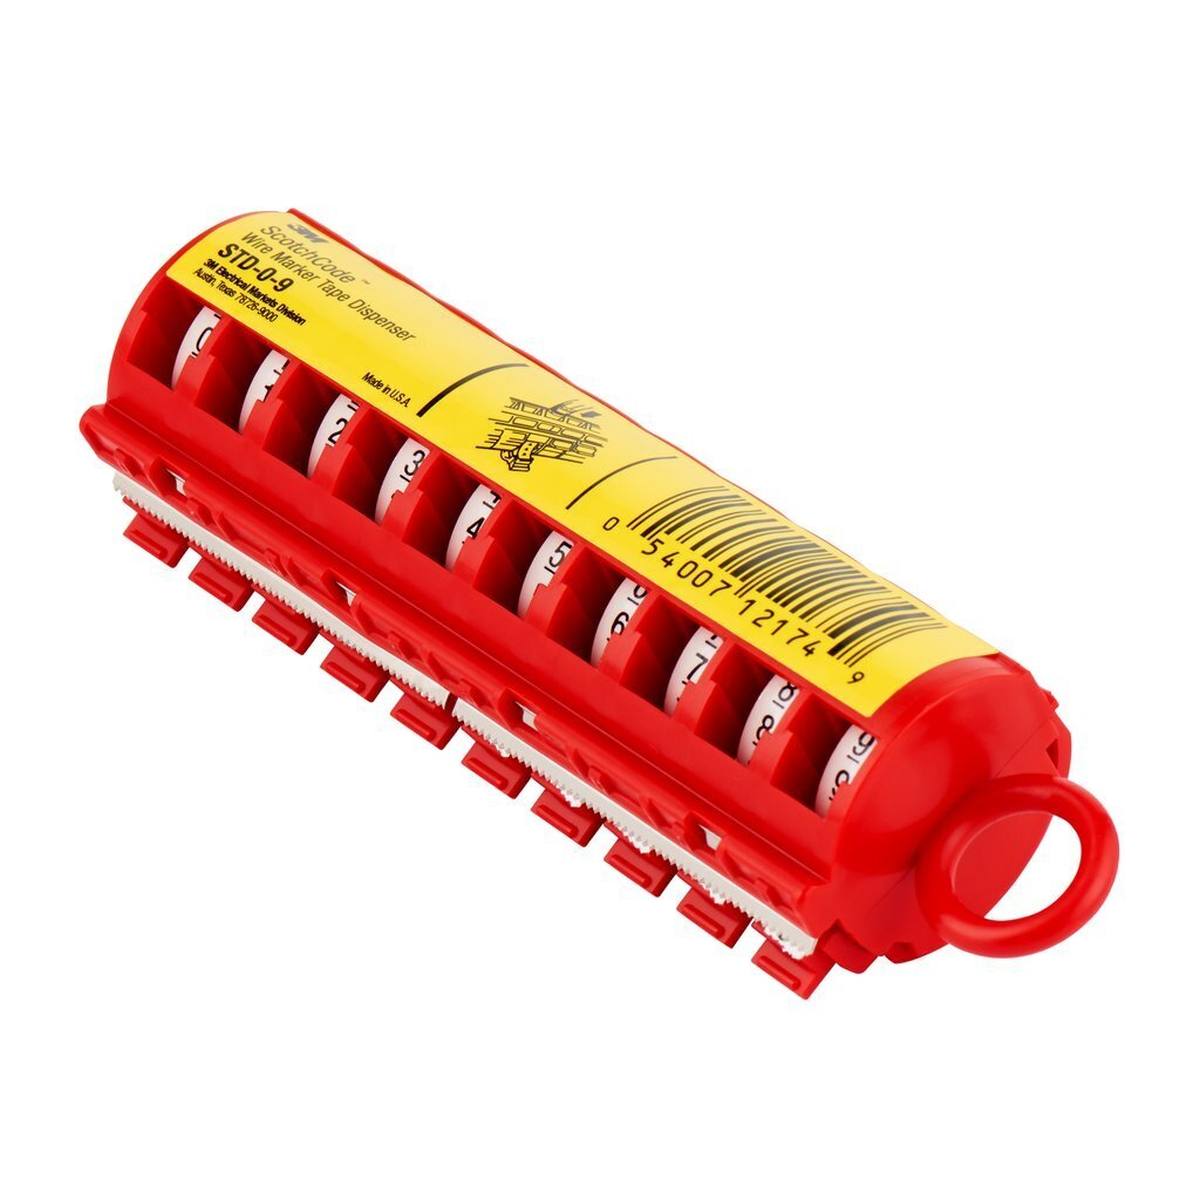 3M ScotchCode STD-0/9 cable marker dispenser, with digits 0-9